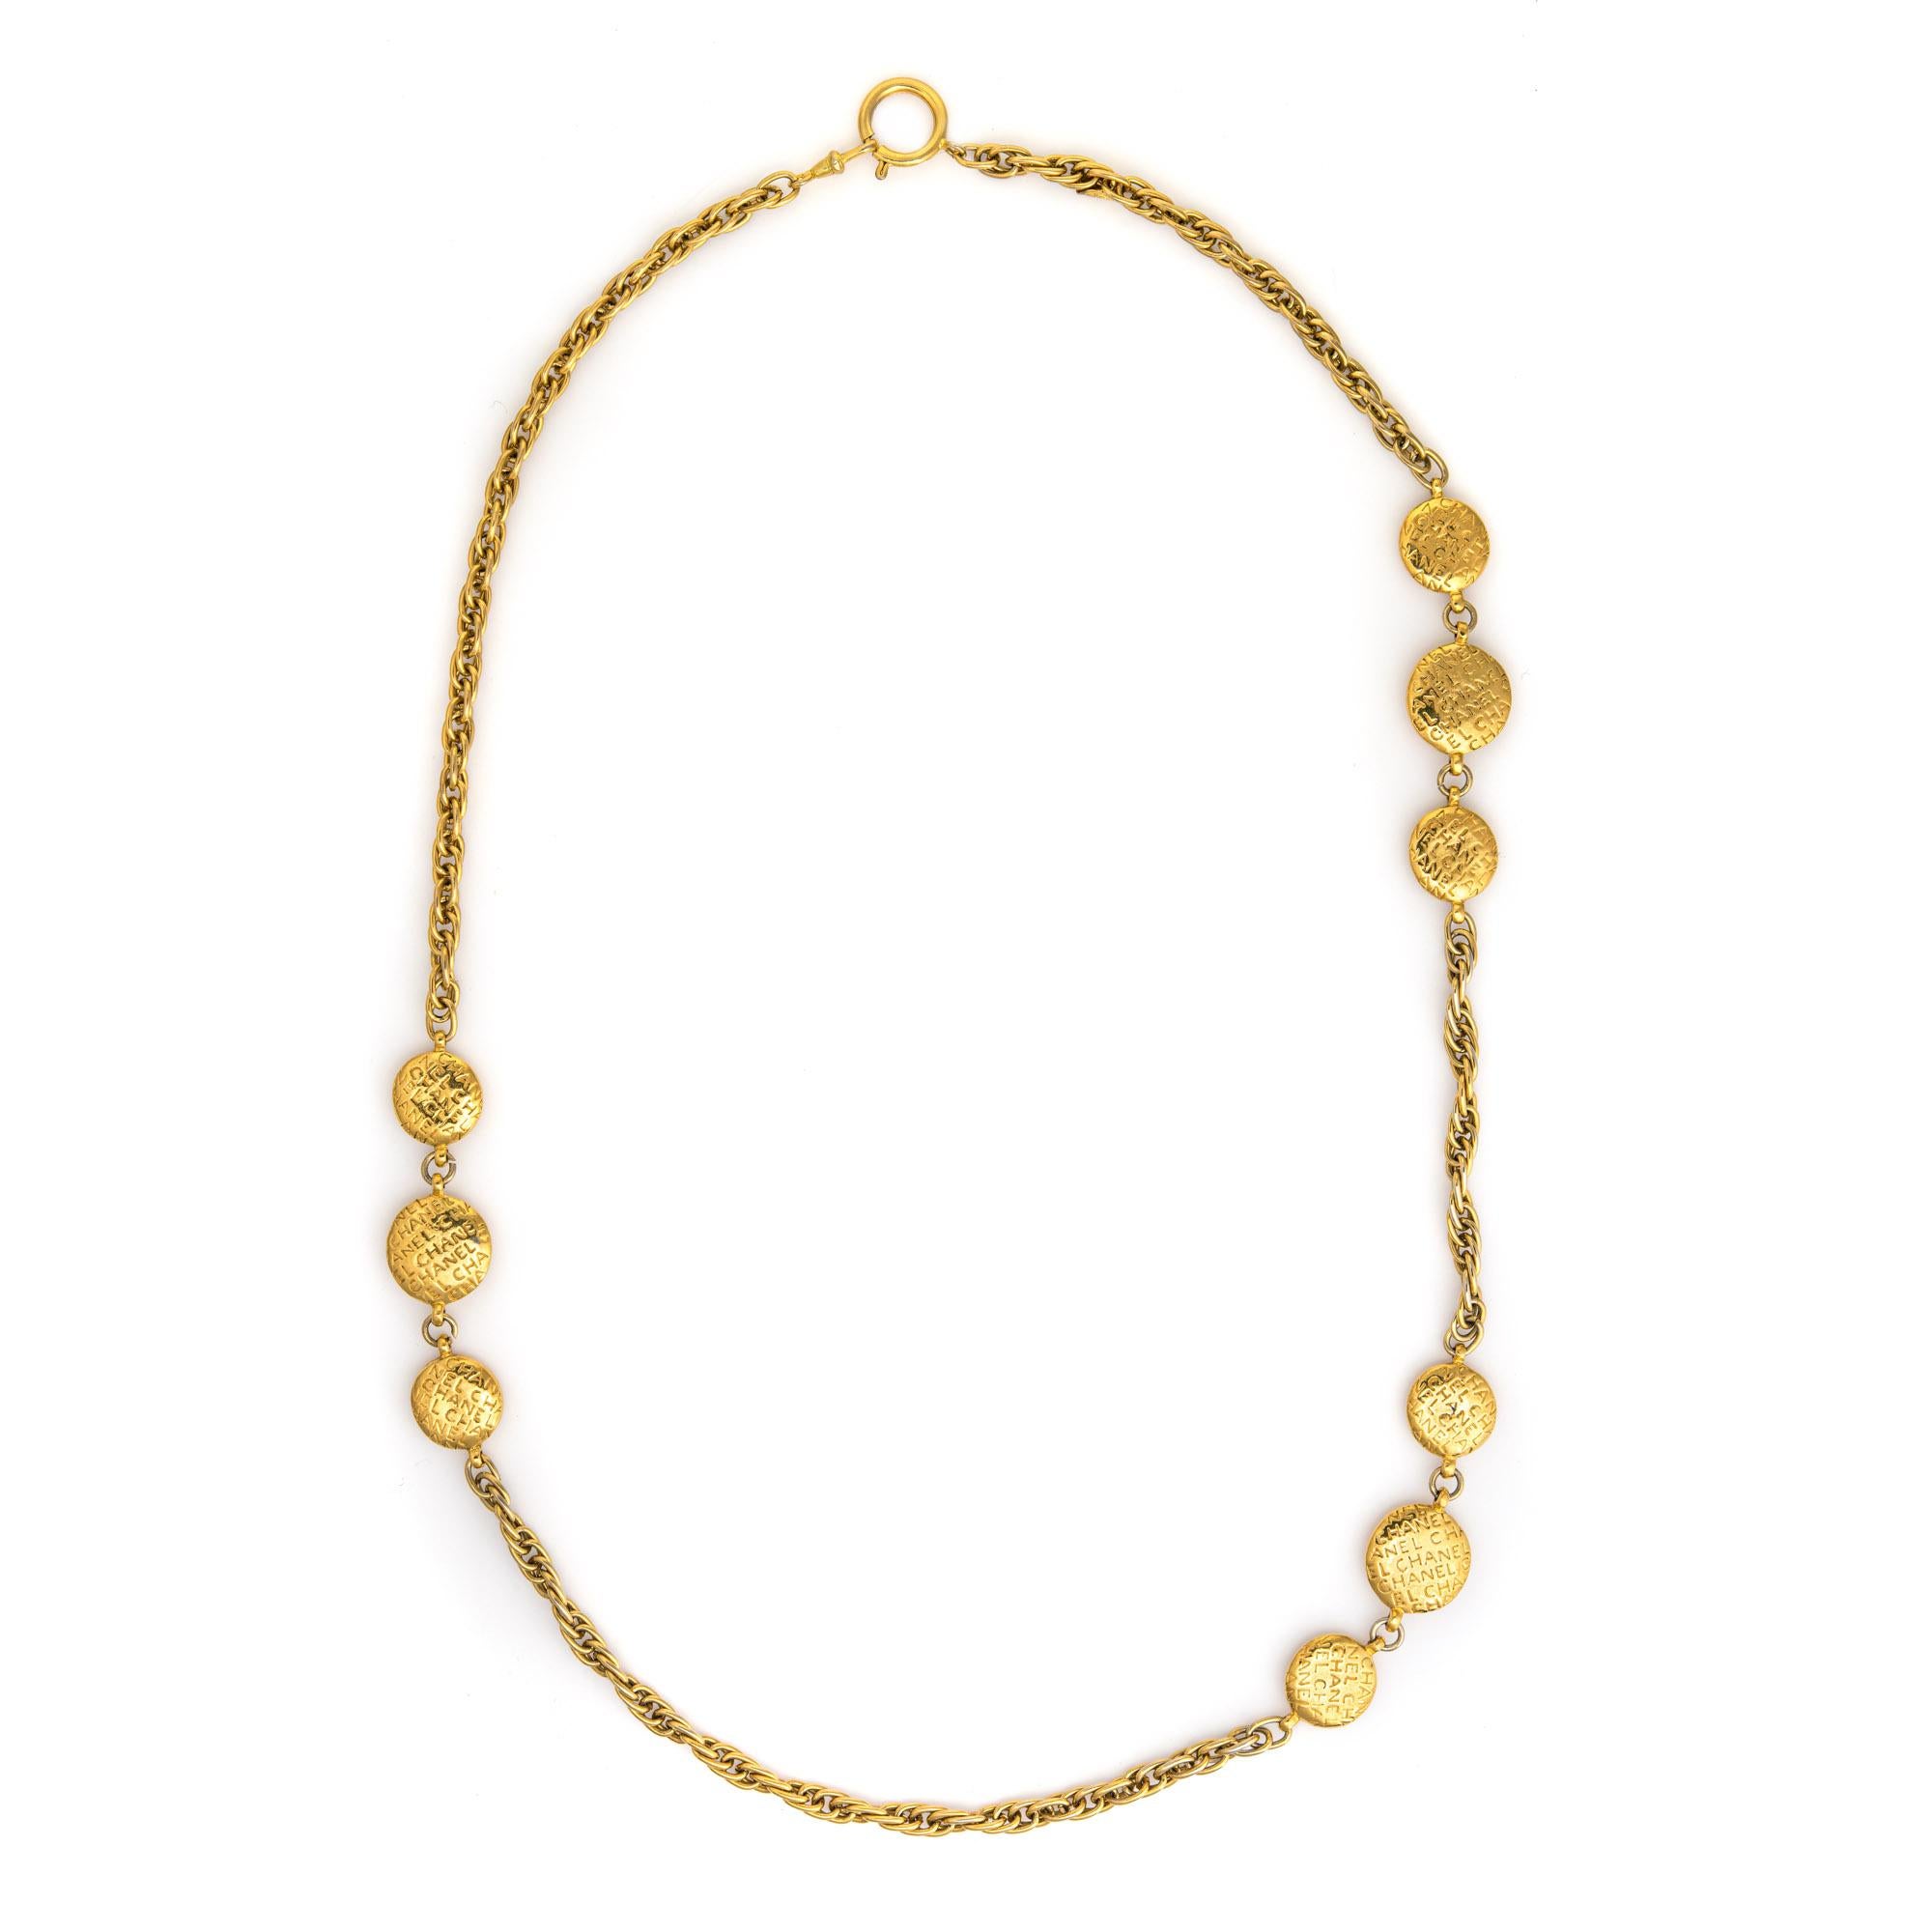 Vintage 70s Chanel medallion necklace crafted in yellow gold-tone (circa 1971-1980). 

The necklace features three medallion stations with repeating 'Chanel' scripts. The reverse side of the larger medallion features the silhouette of Coco Chanel.